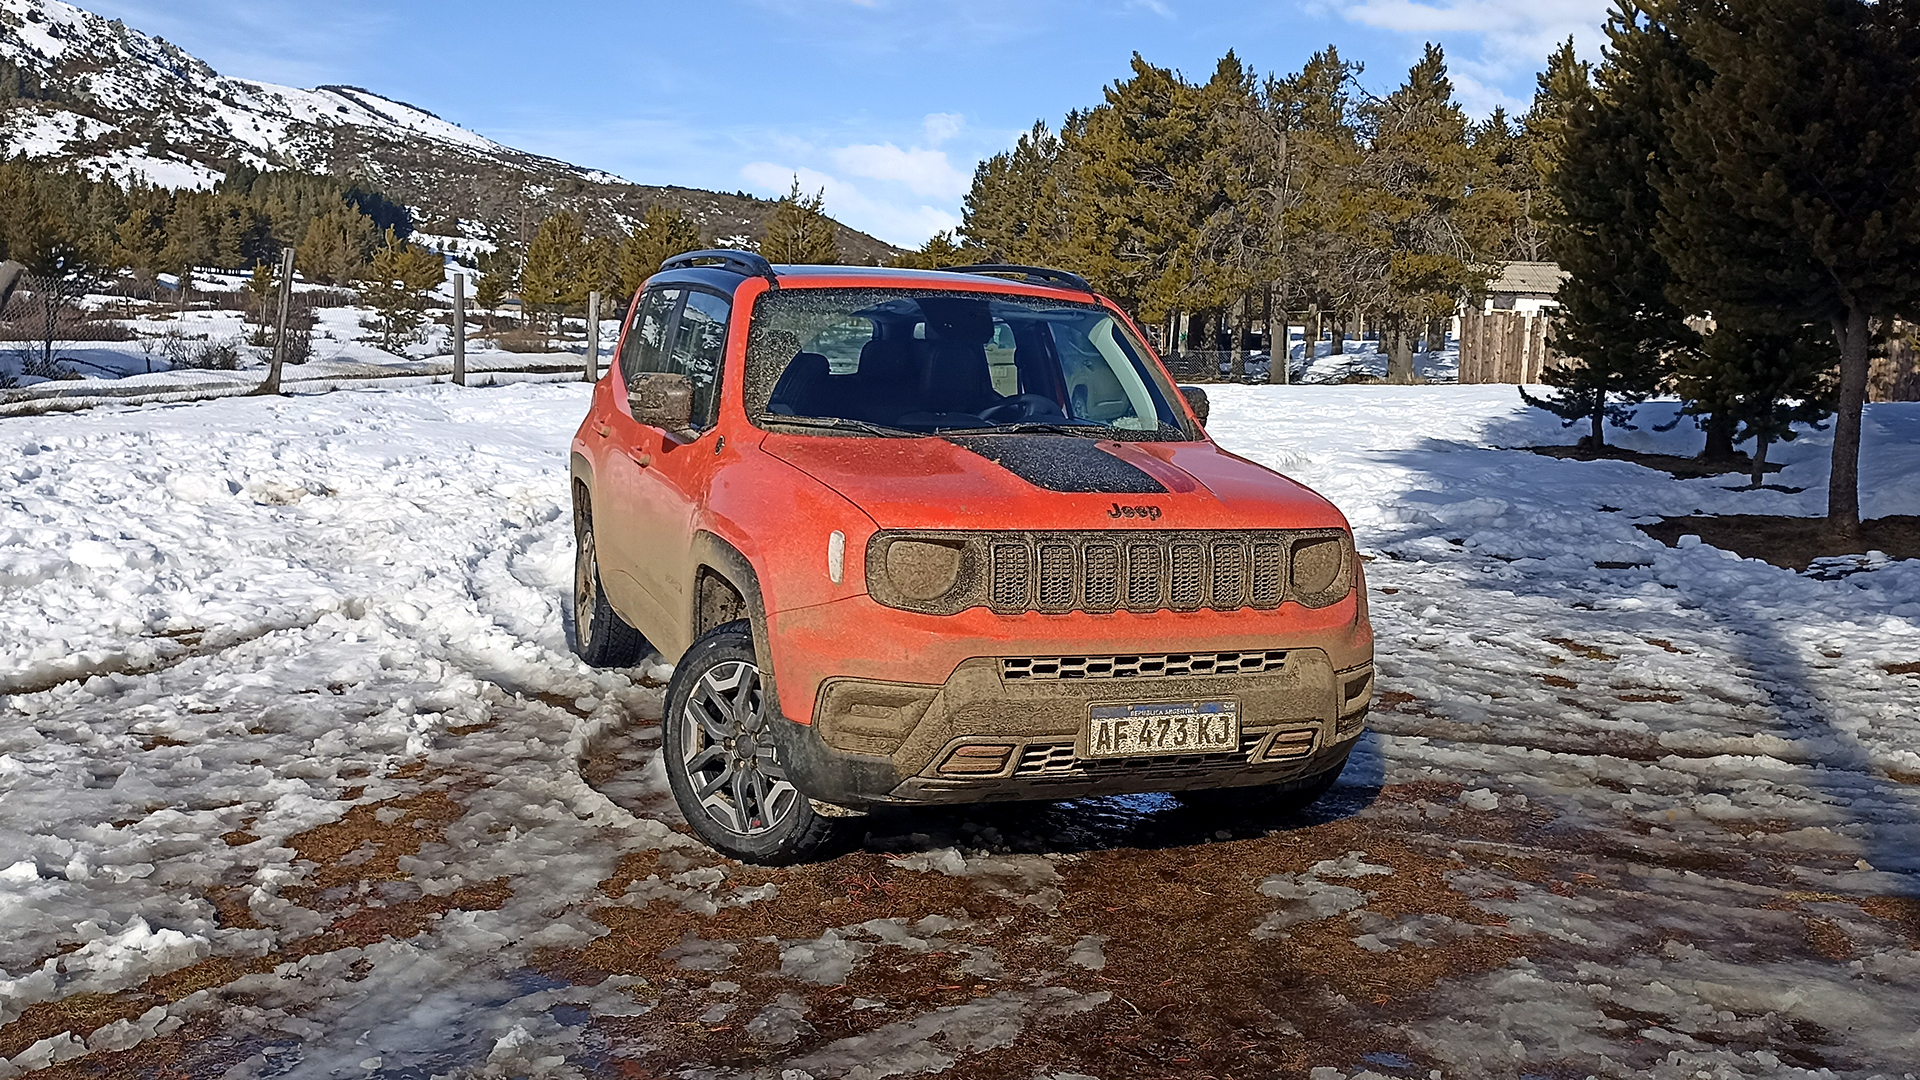 The image of the new Renegade features the Trialhawk version's most iconic color, orange called Punk'n Orange.